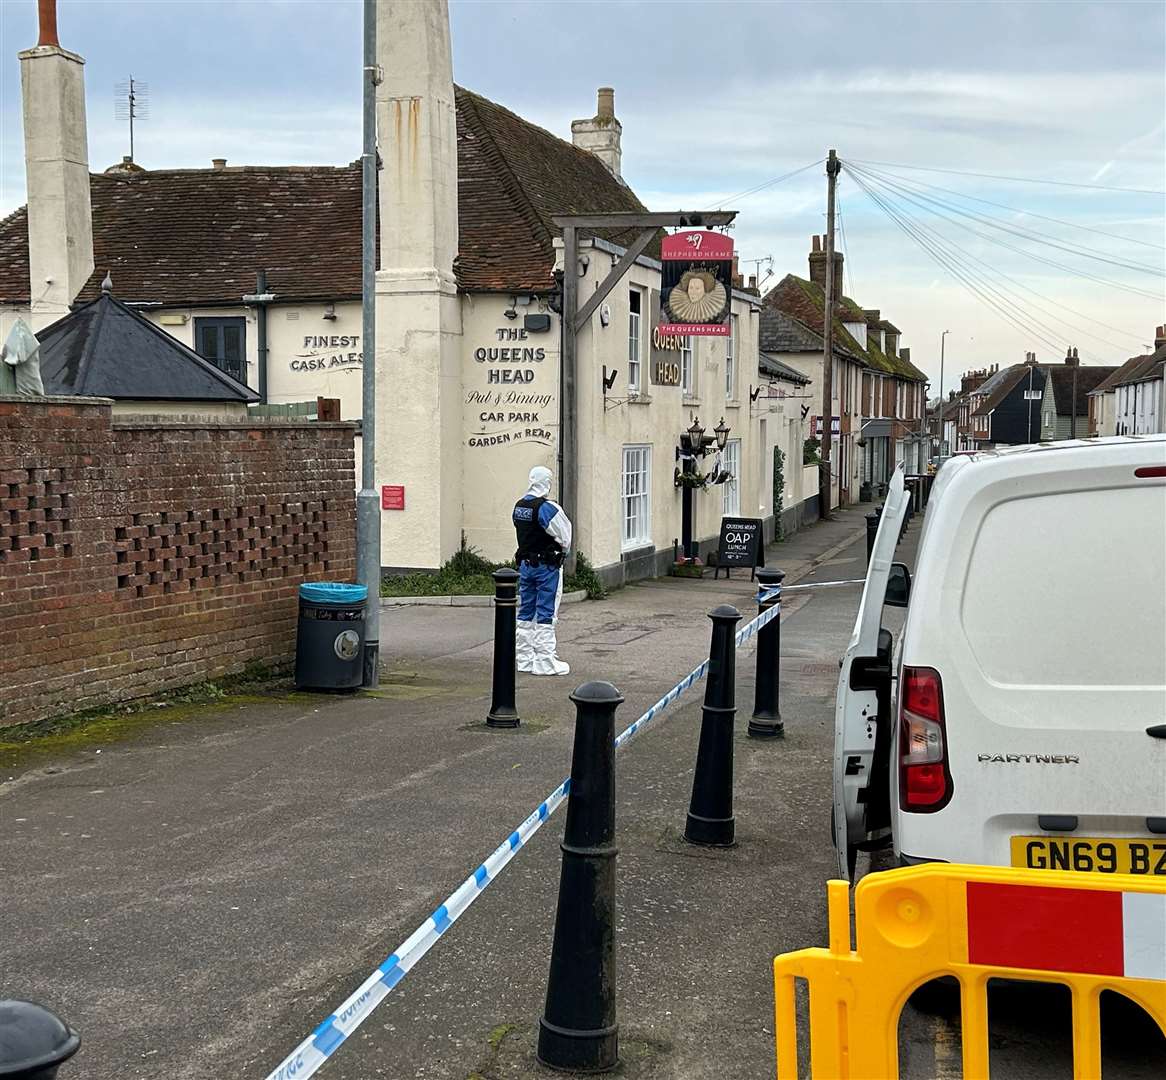 Police were at the Queen’s Head pub in Boughton-under-Blean